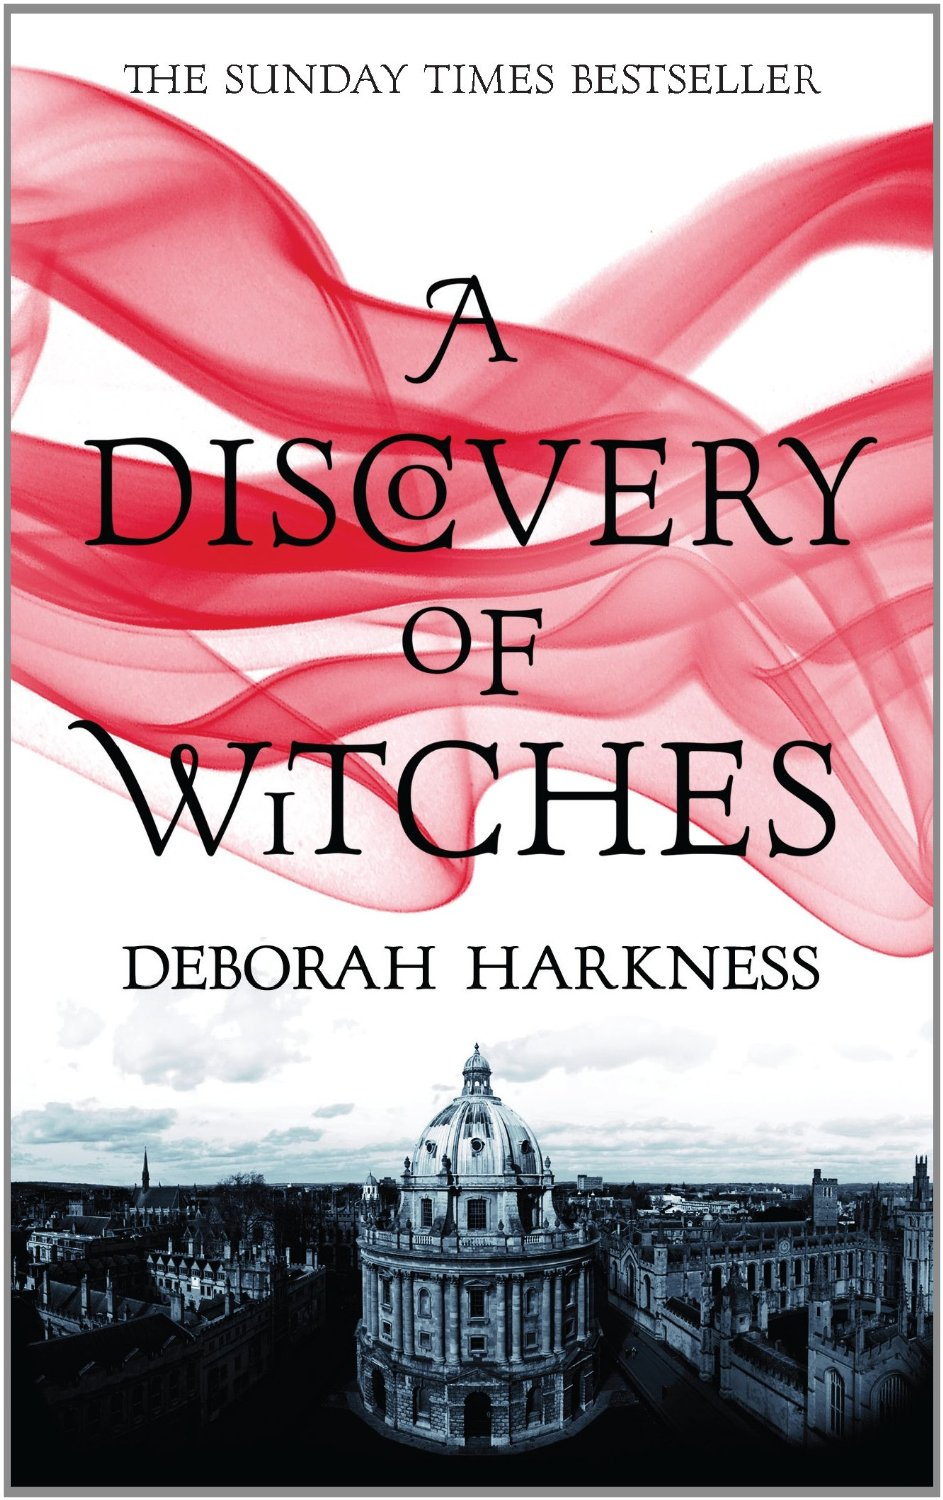 A discovery of witches book cover